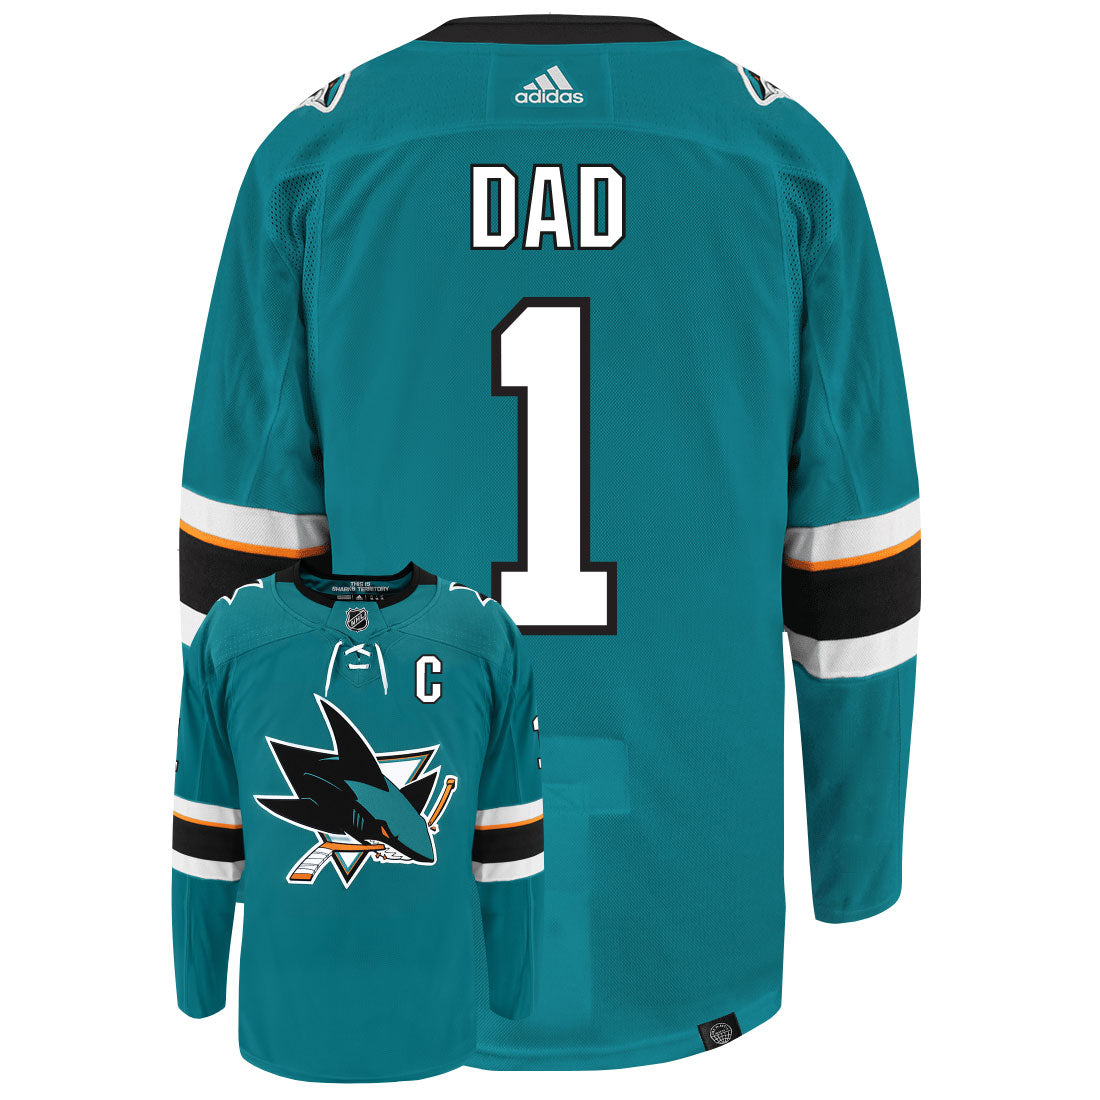 San Jose Sharks Dad Number One Adidas Primegreen Authentic NHL Hockey Jersey